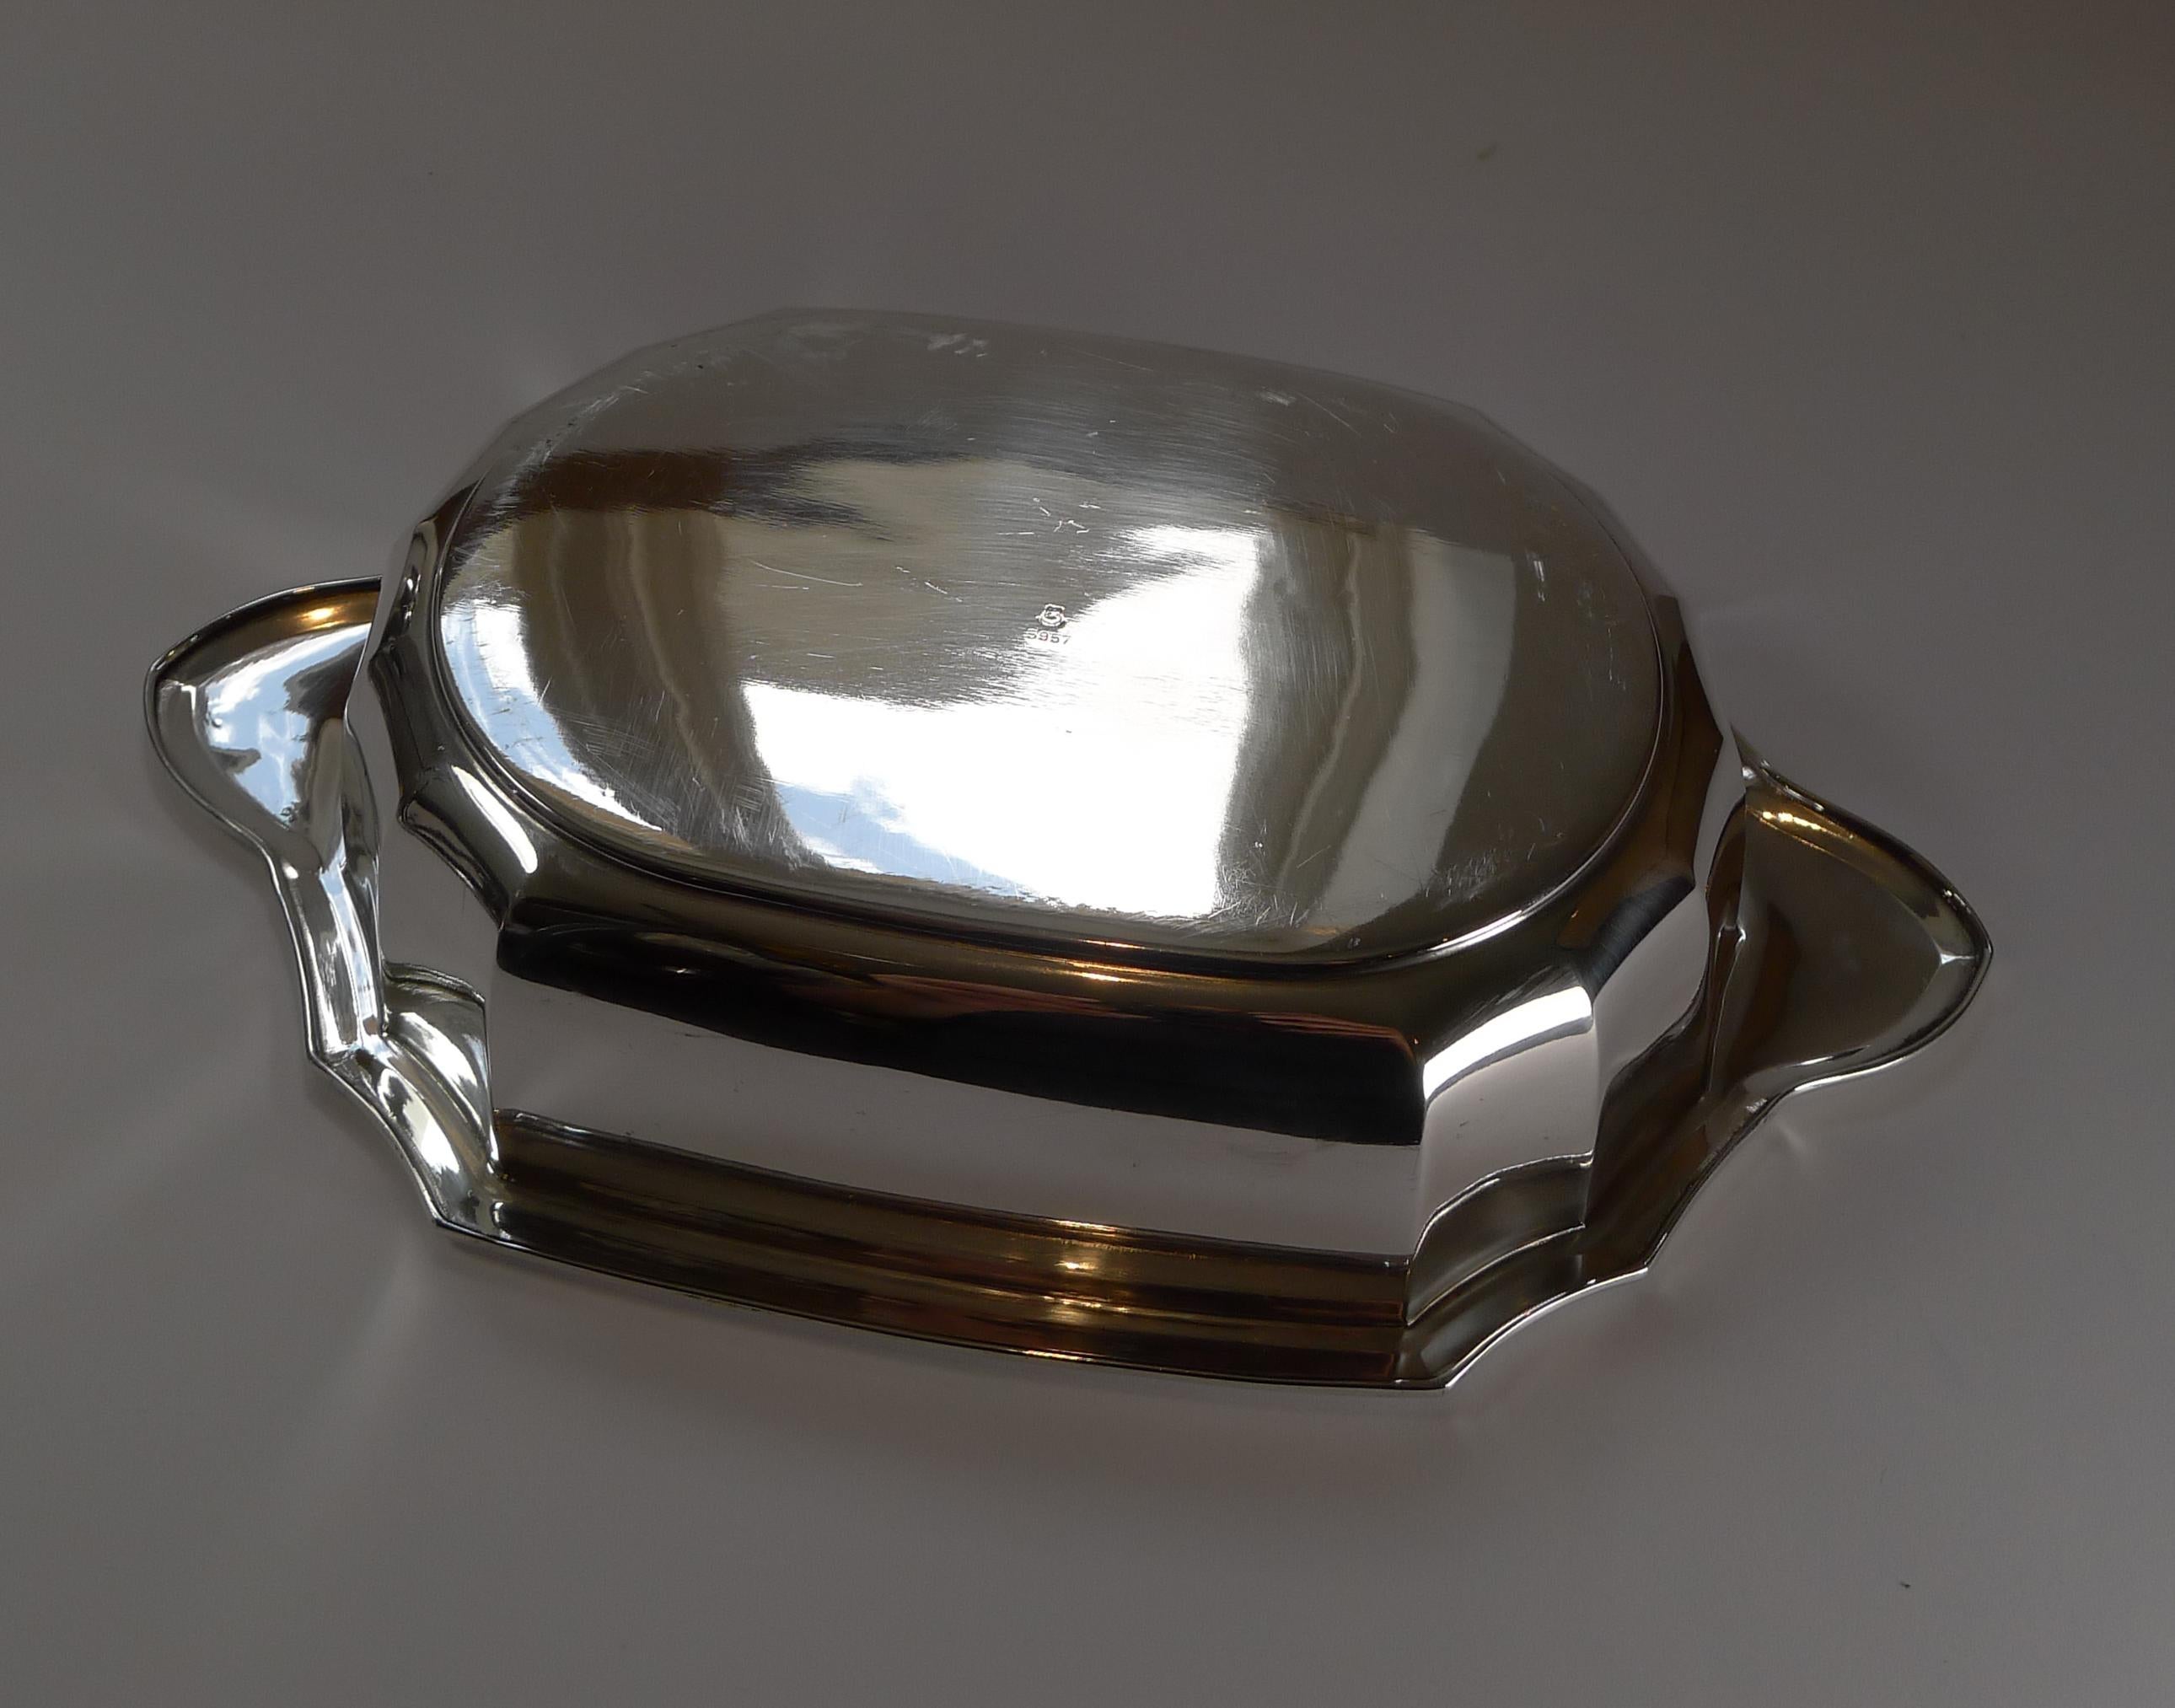 About as stylish as they come, this is a very fine example of an Art Deco entree / serving dish with lid.

Made from silver plate, it has just returned from my silversmith's workshop where it has undergone professional cleaning and polishing,